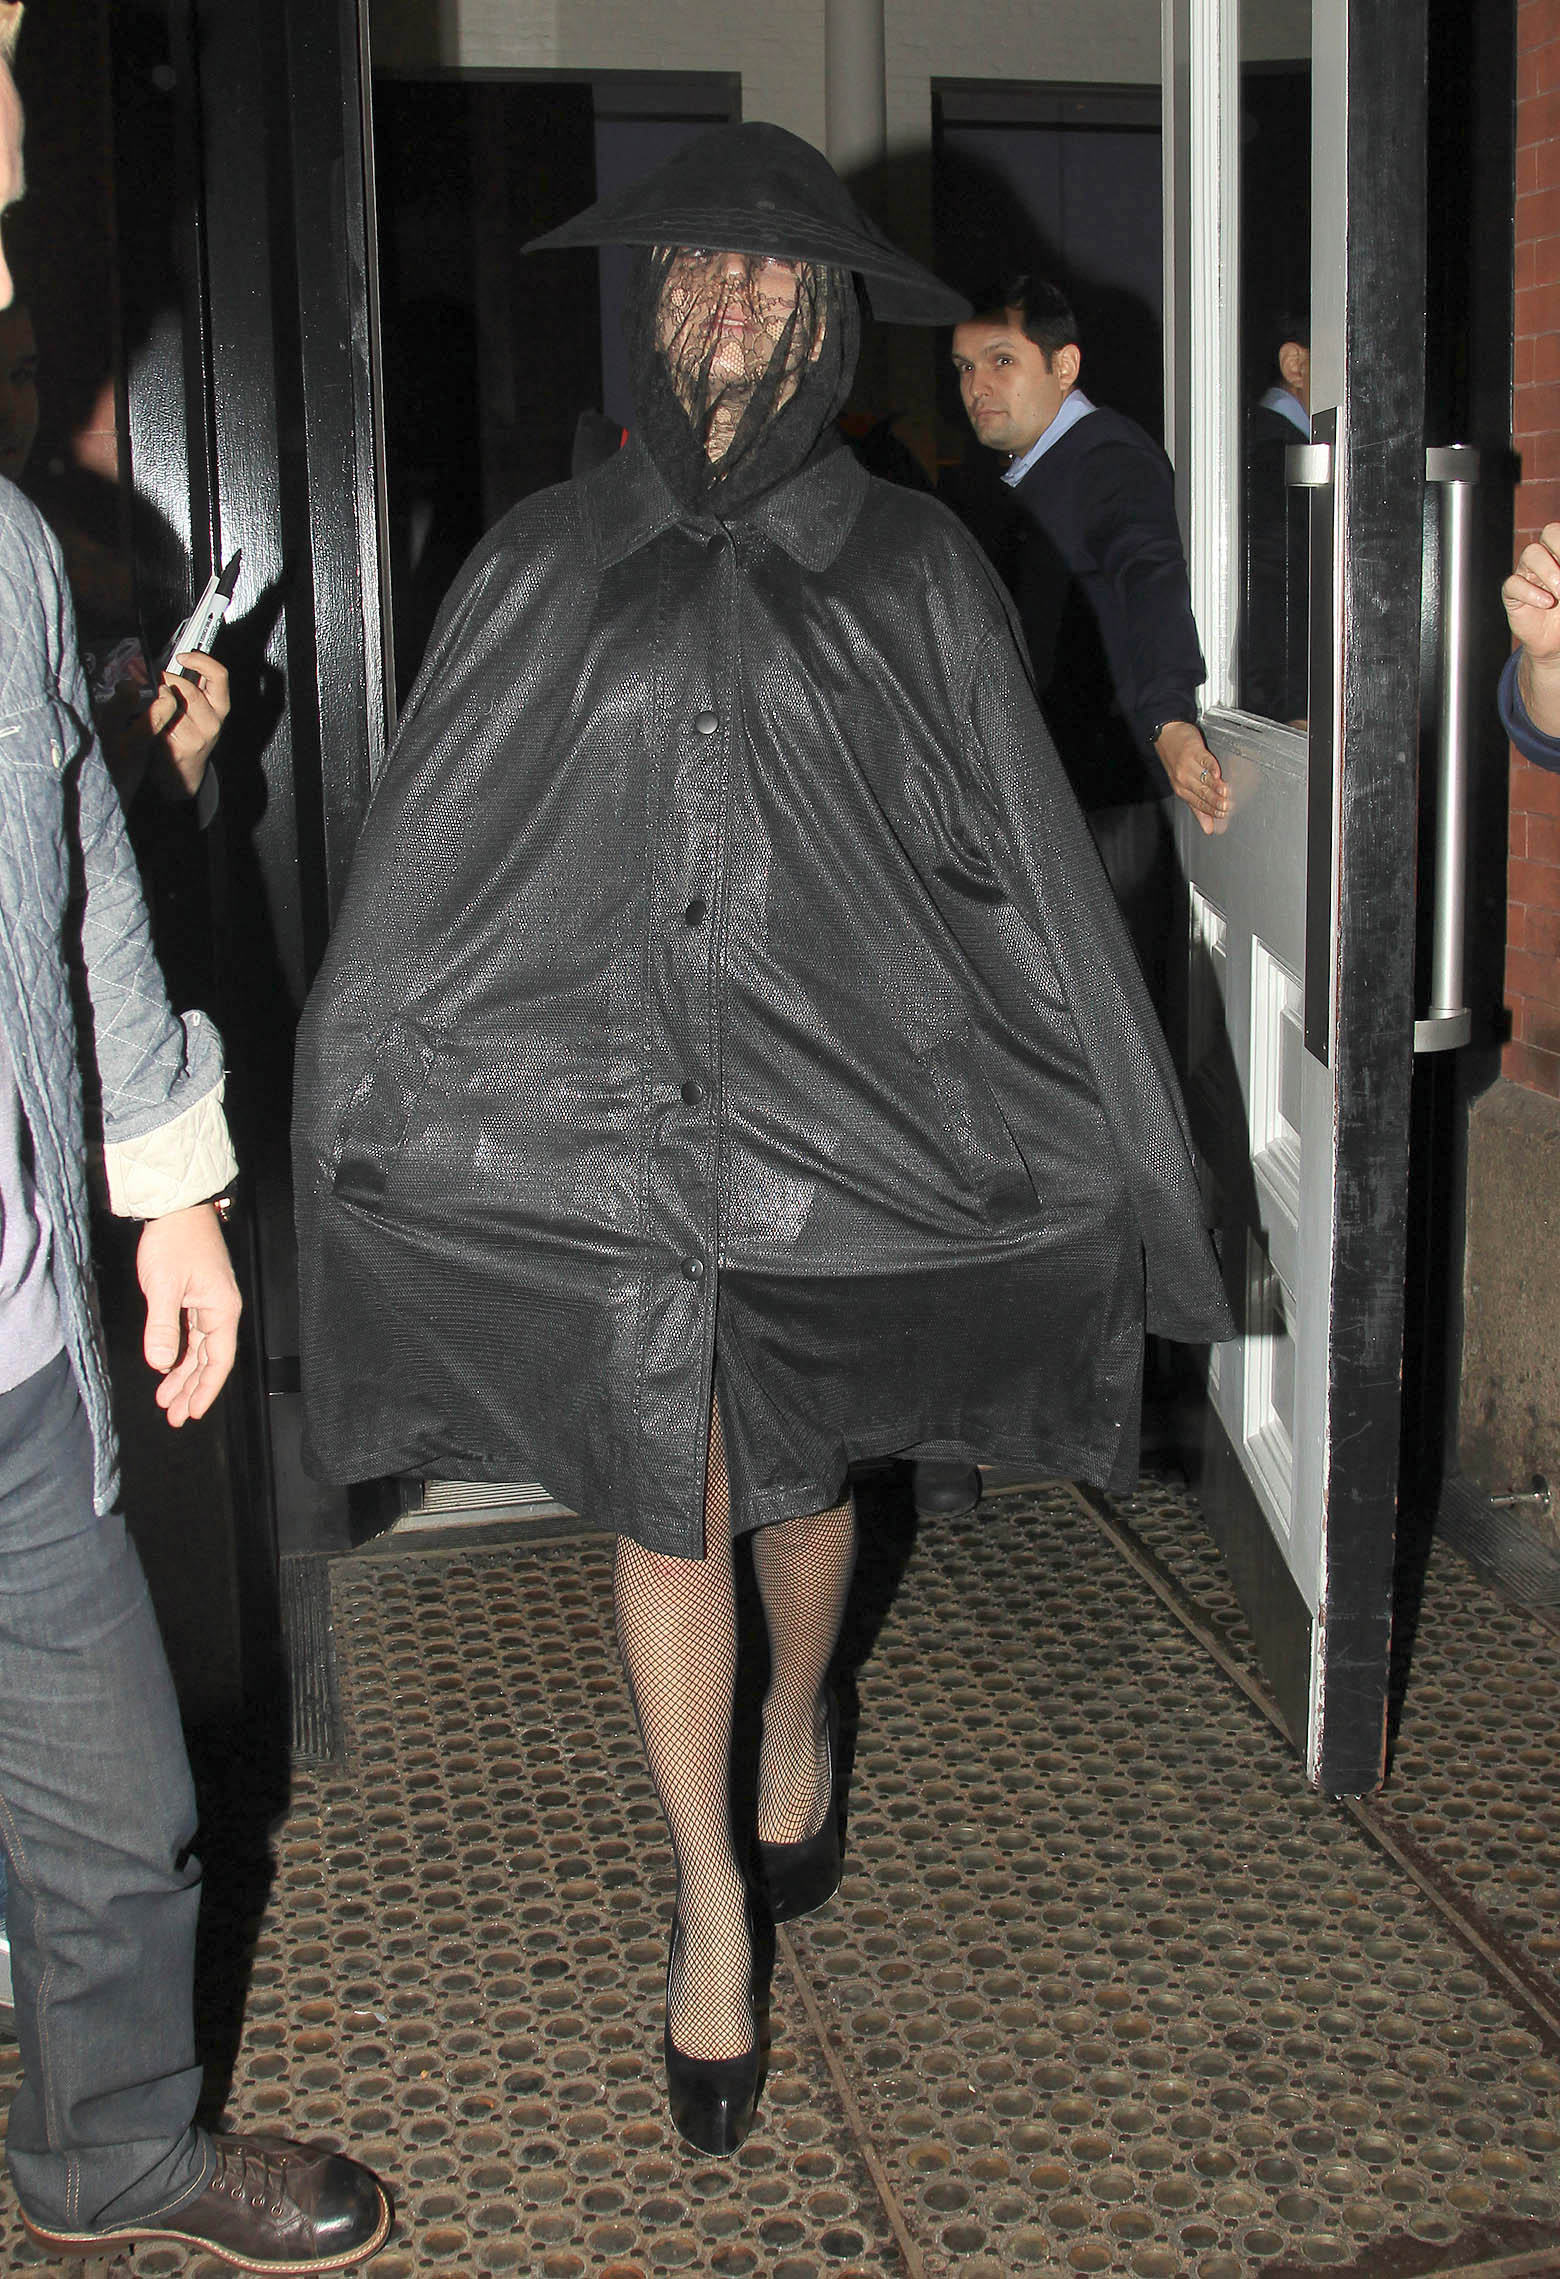 Lady Gaga leaving her downtown hotel to head up to Harlem to continue filming her music video in New York City